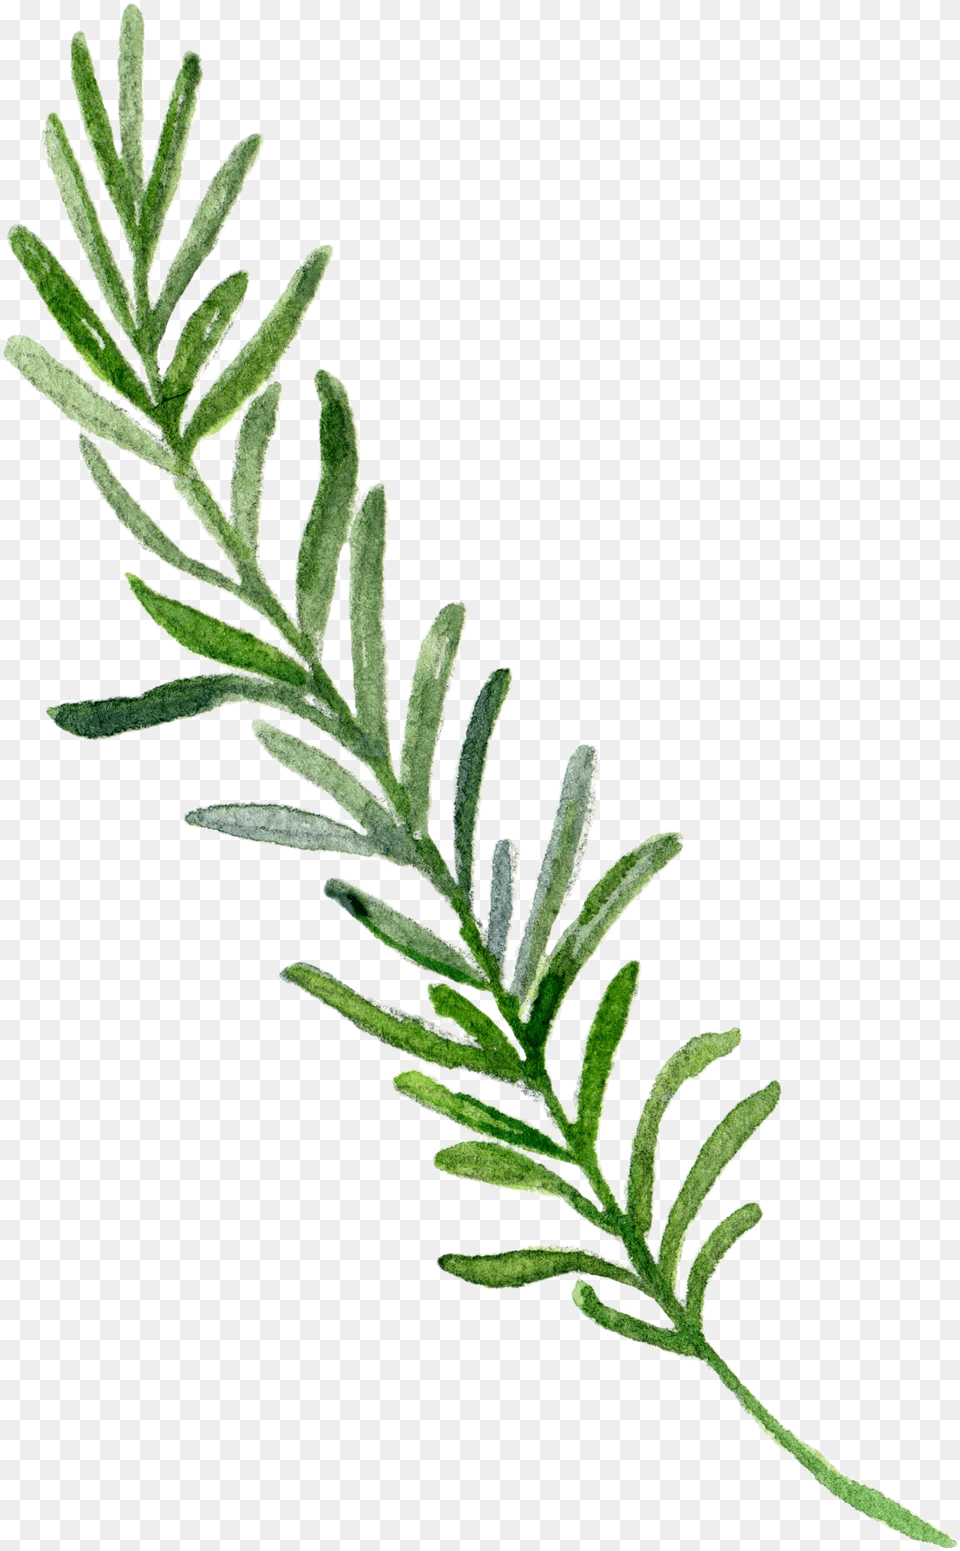 Border Leaf Hand Painted Download Hd Clipart, Herbs, Tree, Plant, Herbal Png Image